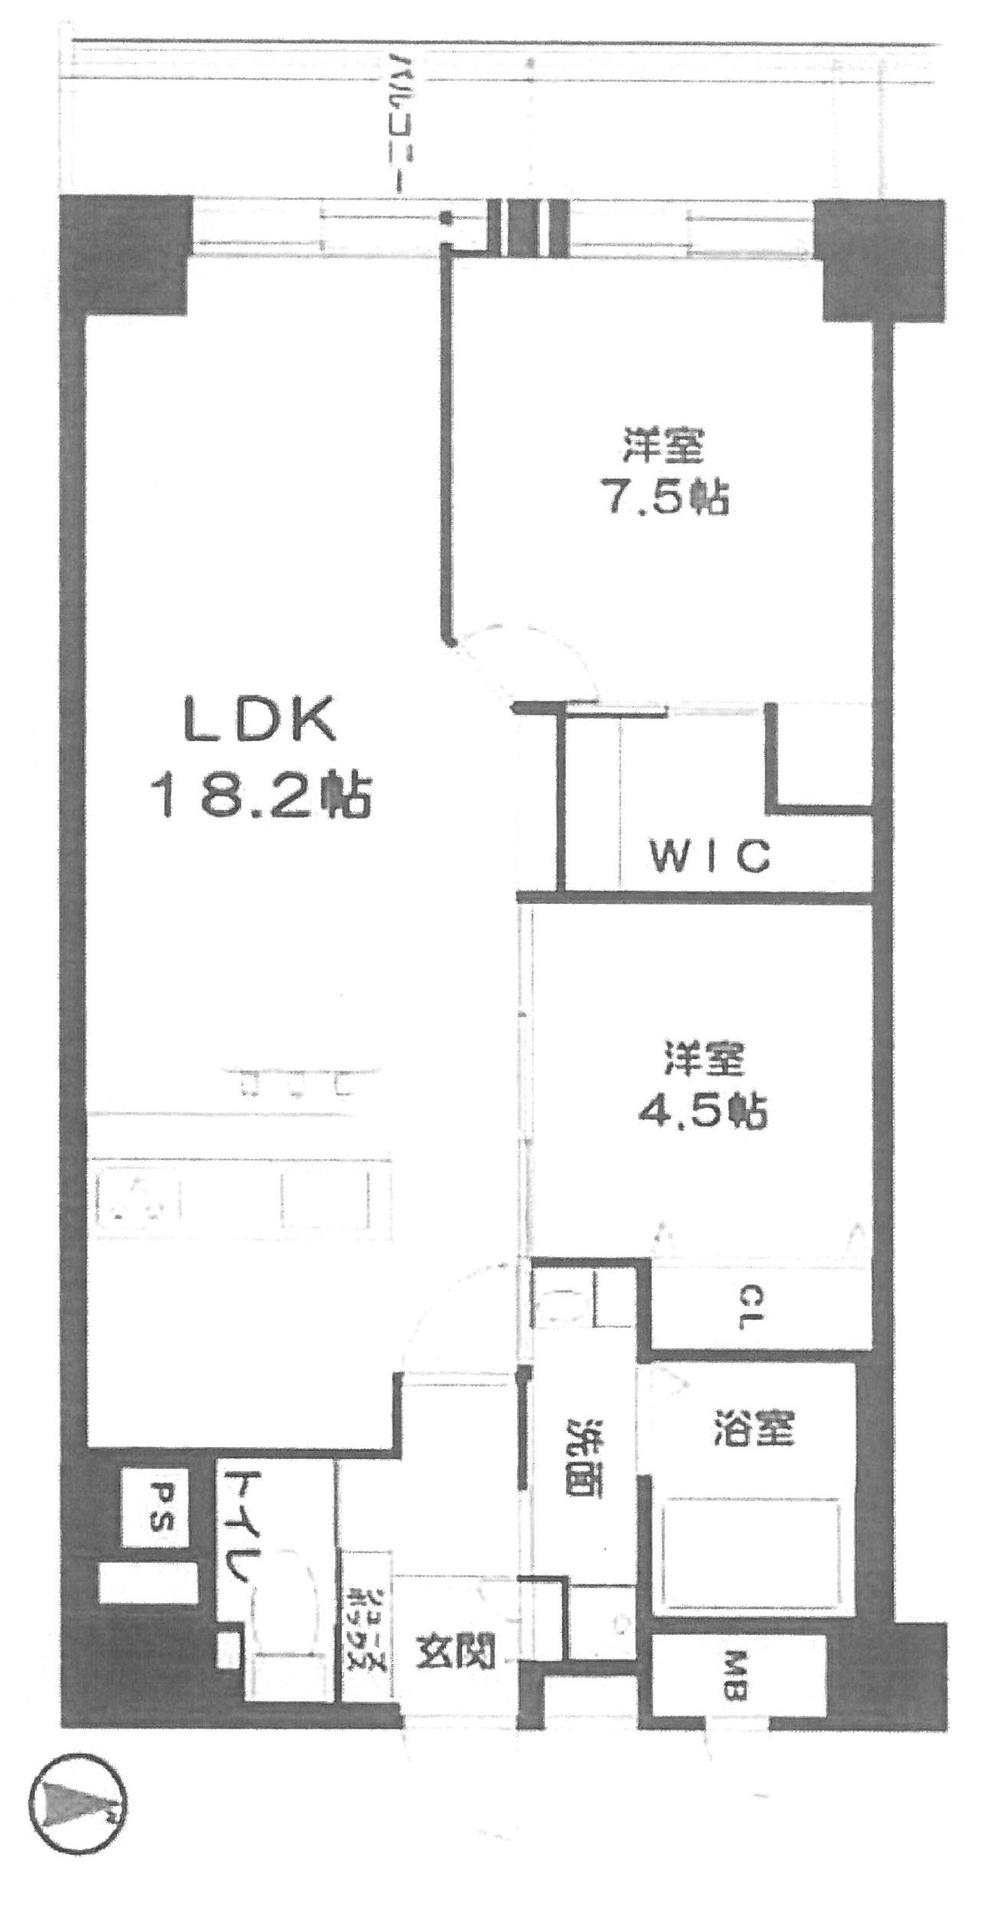 Floor plan. 2LDK, Price 17.8 million yen, Footprint 66 sq m , Balcony area 6.27 sq m study, PC dressing room, Size up bus Lumpur - No, Add cooked, Dishwasher in the kitchen ・ water filter ・ Glass top stove ・ Bidet, Shampoo dresser ・ Flooring This is an 8-floor.